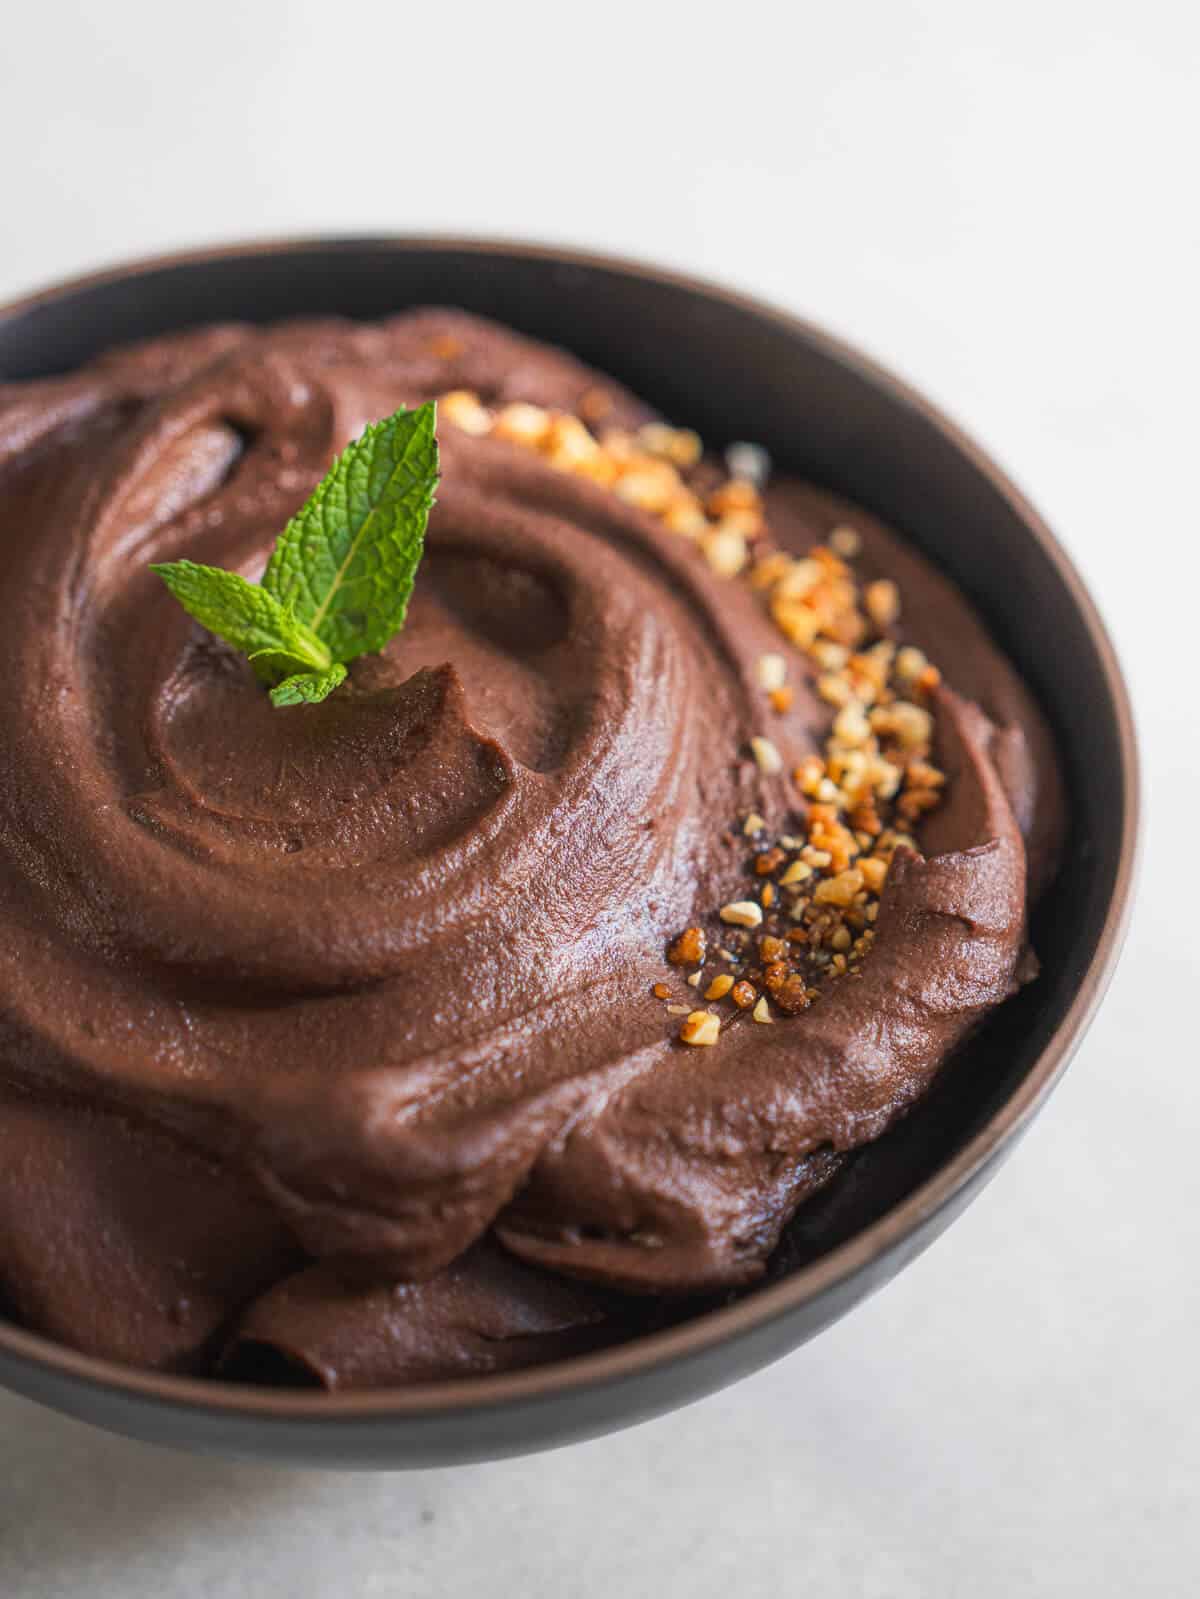 garnish the dark chocolate hummus with crushed almonds and mint leaves.